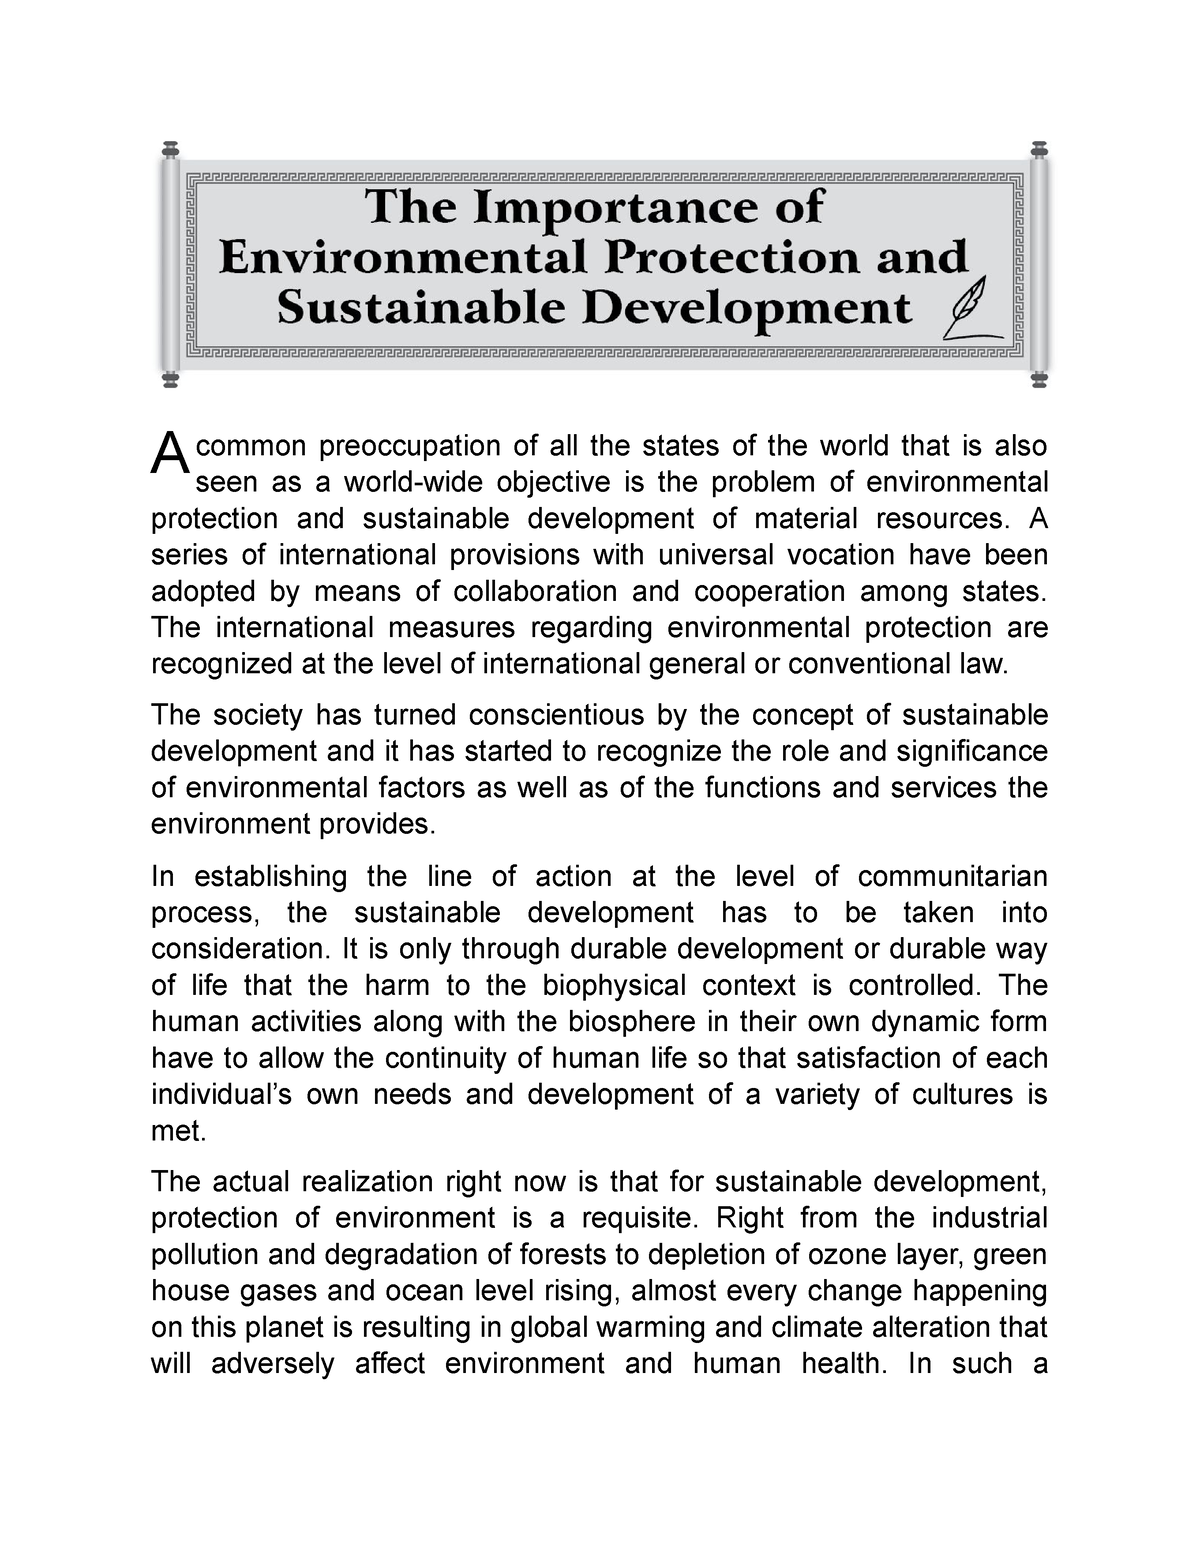 importance of environmental laws essay